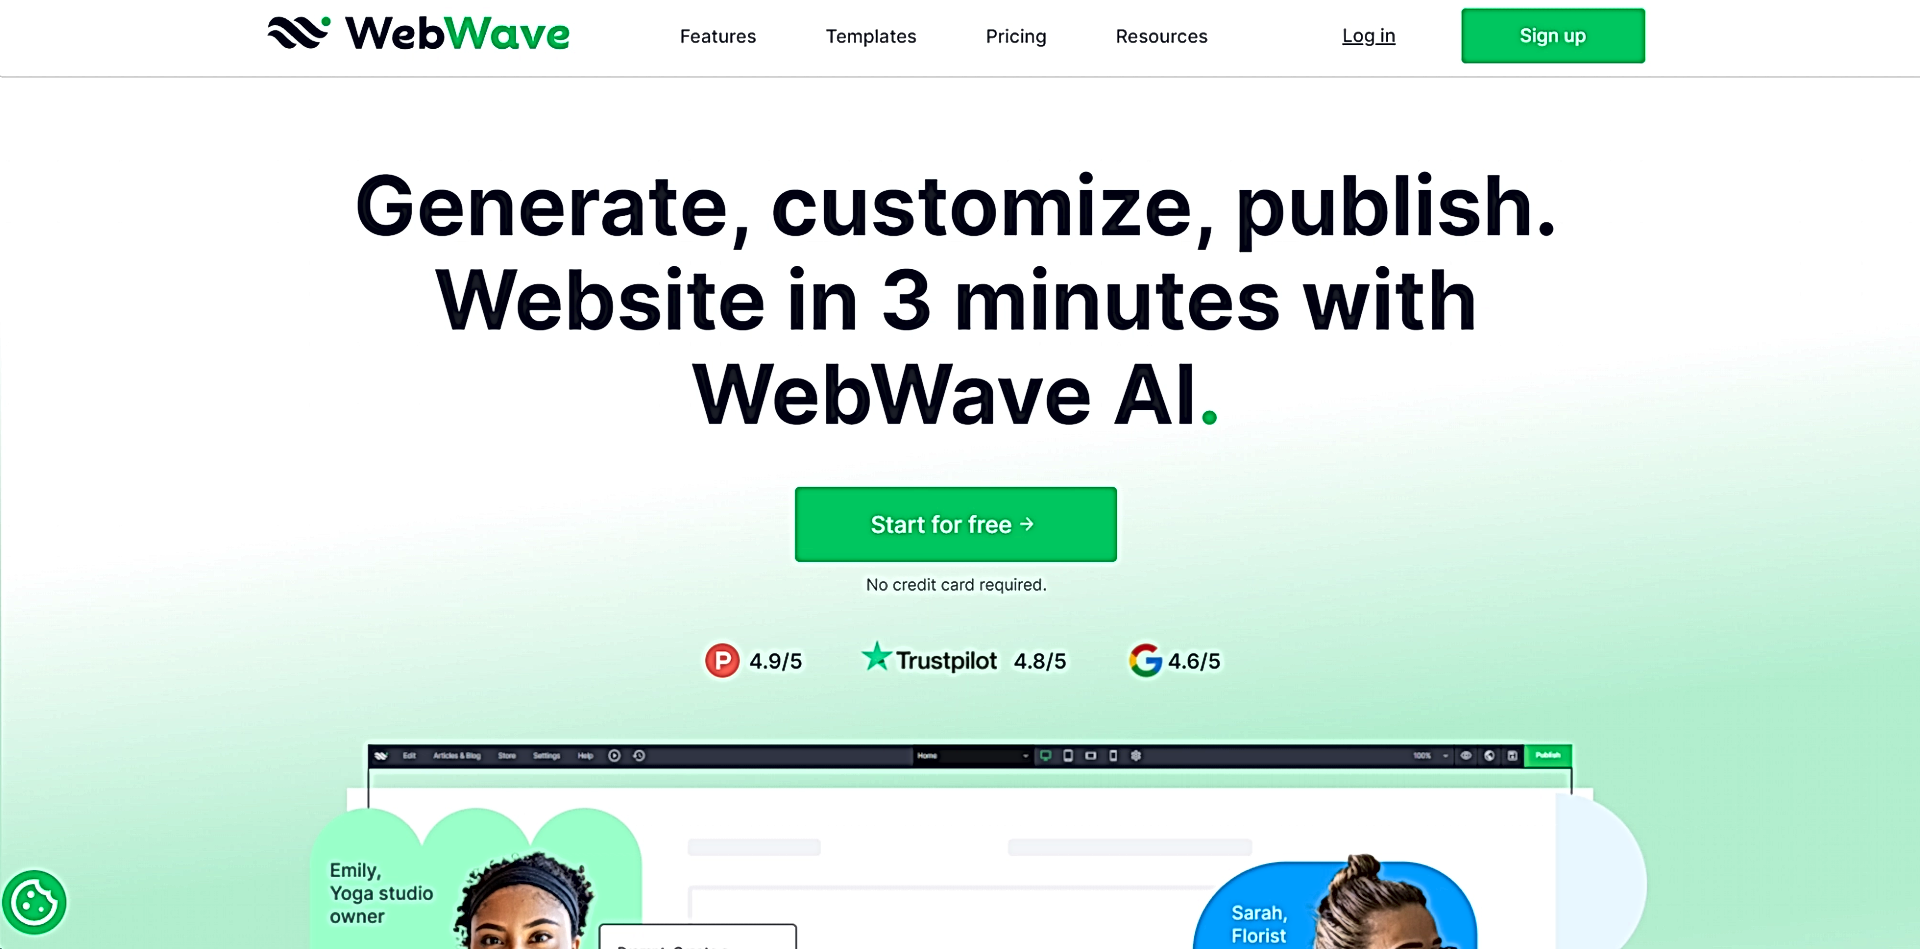 WebWave featured